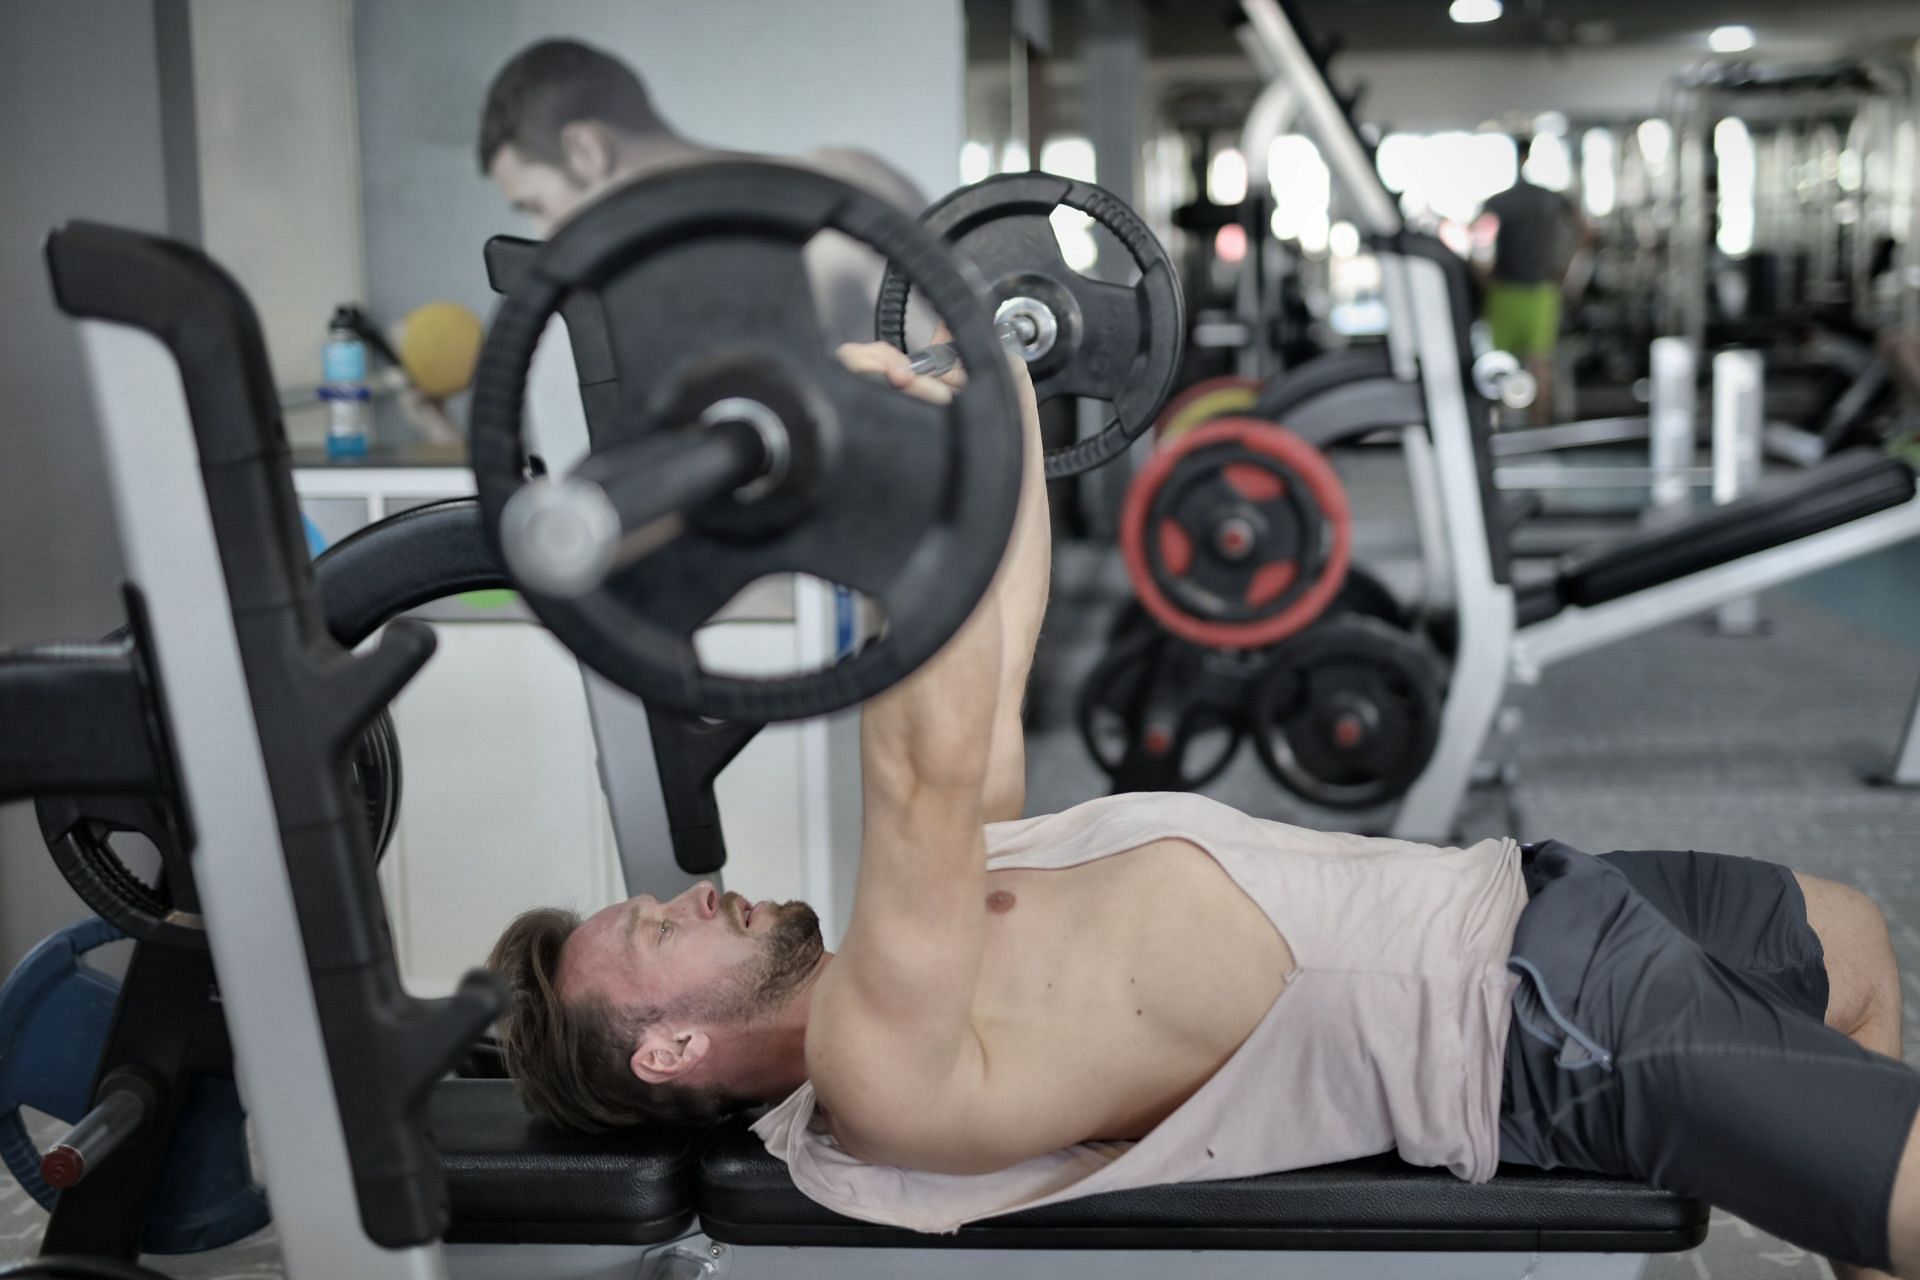 Chest press will strengthen your chest muscles (Image via Pexels/Andrea Piacquadio)